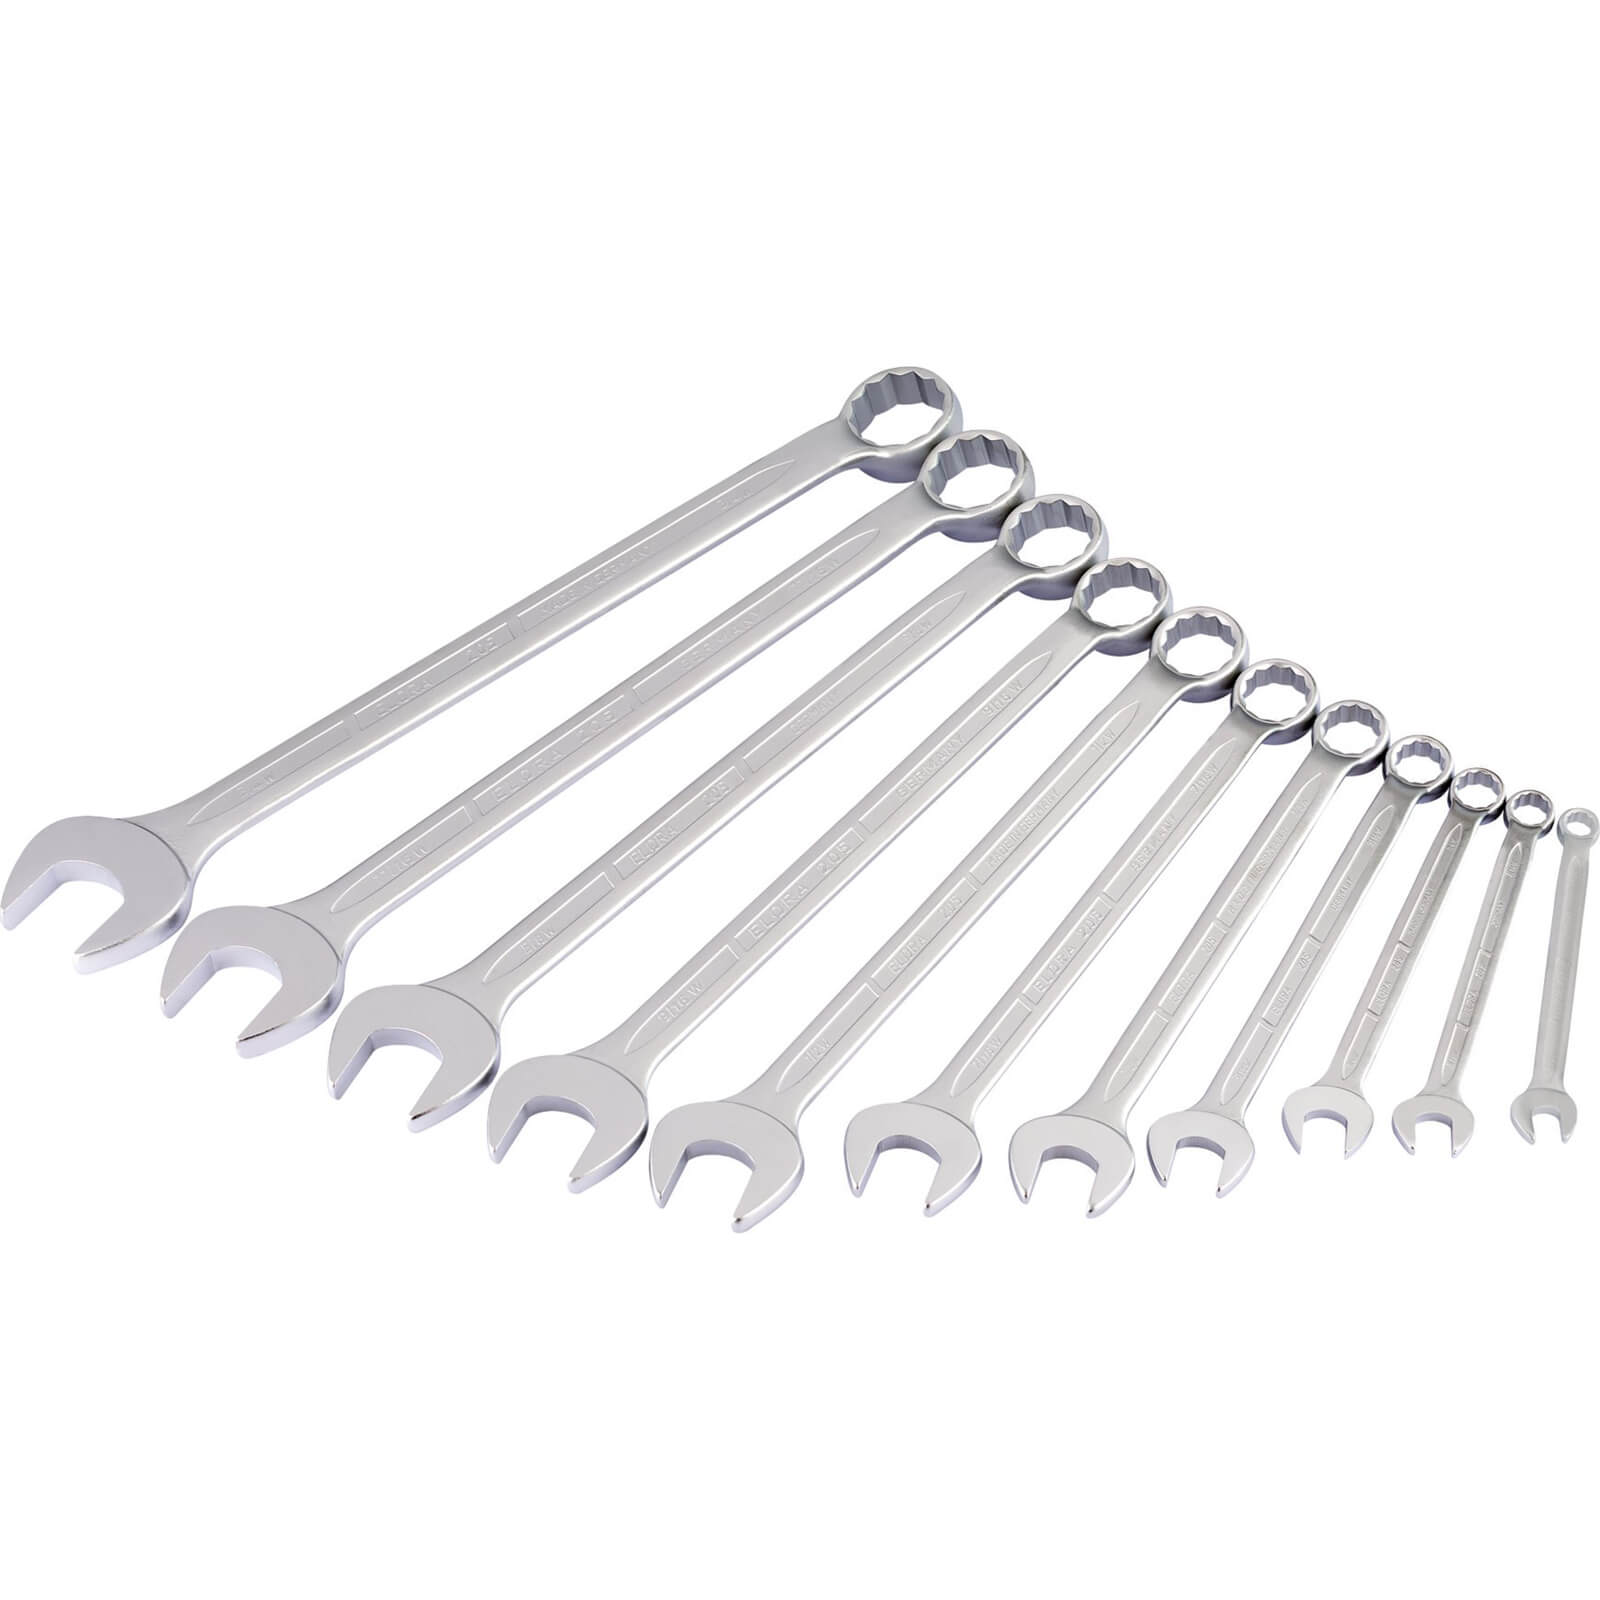 Image of Elora 11 Piece Long Combination Spanner Set Whitworth